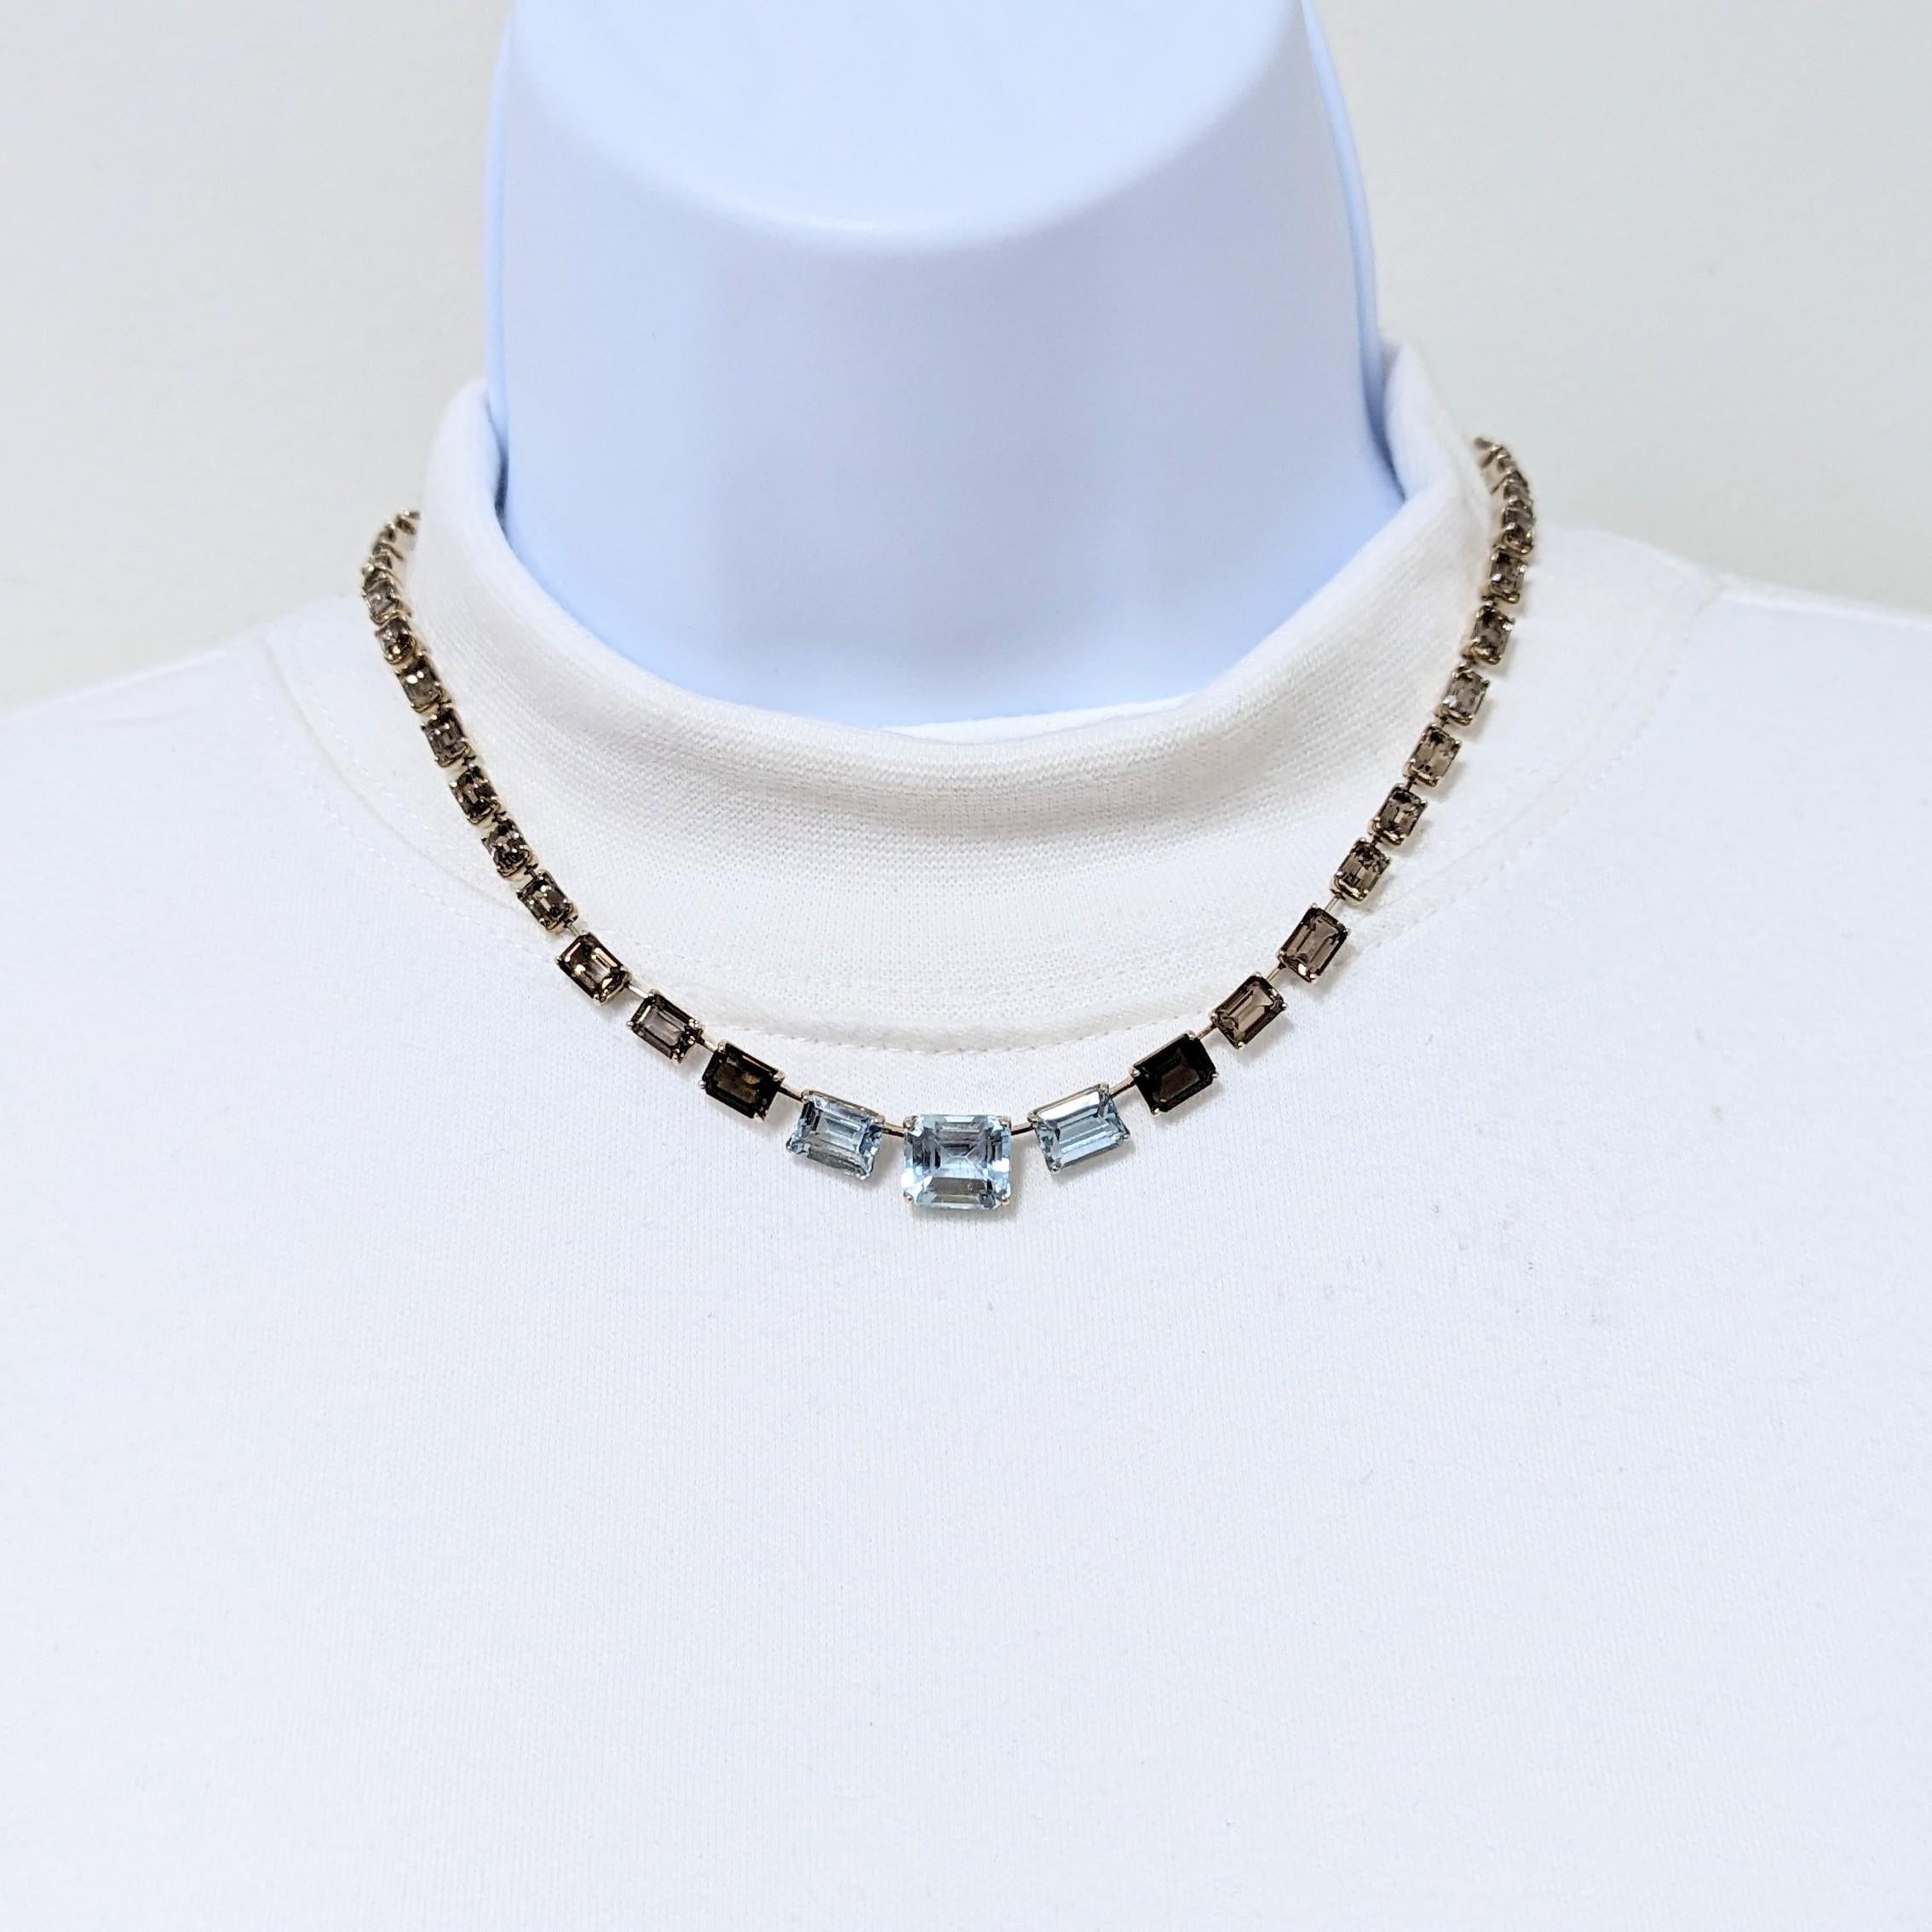 Beautiful necklace by H. Stern with big blue topaz and smokey topaz emerald cuts.  Handmade in 18k white gold.  Length is 17.25